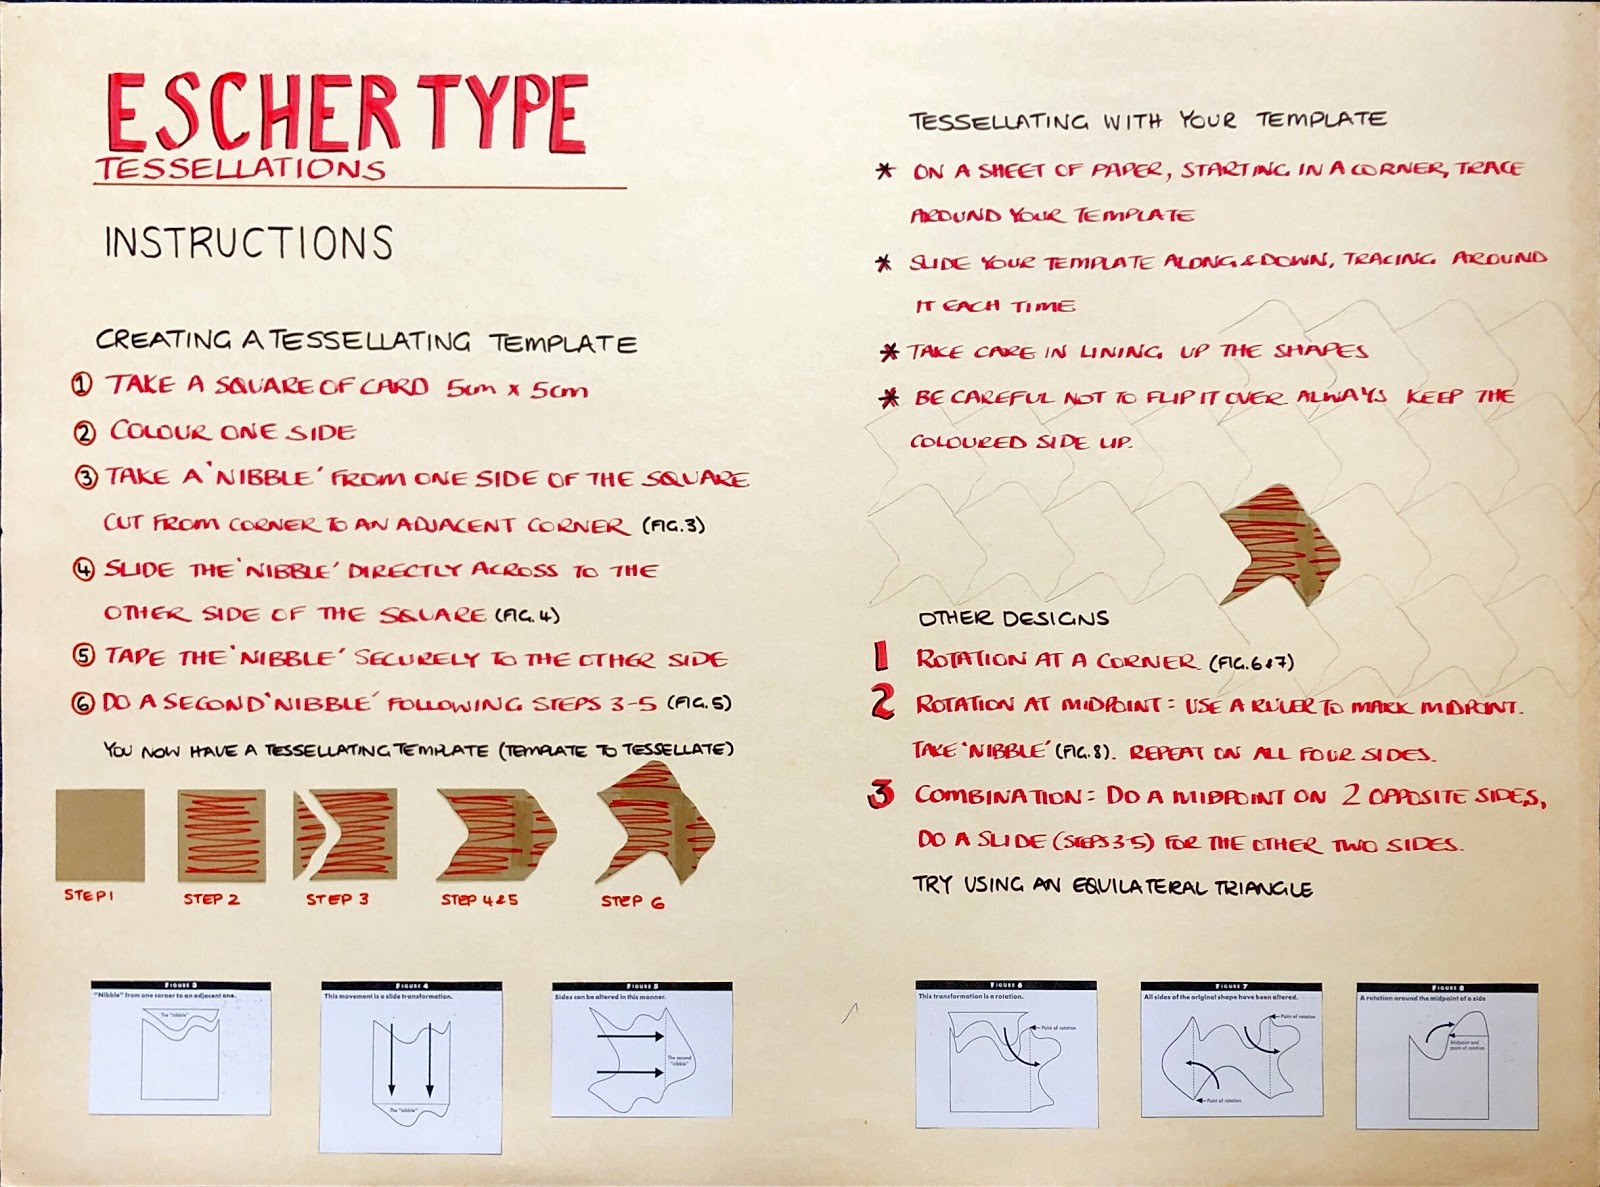 Instructions for the Escher Type Tessellations activity.